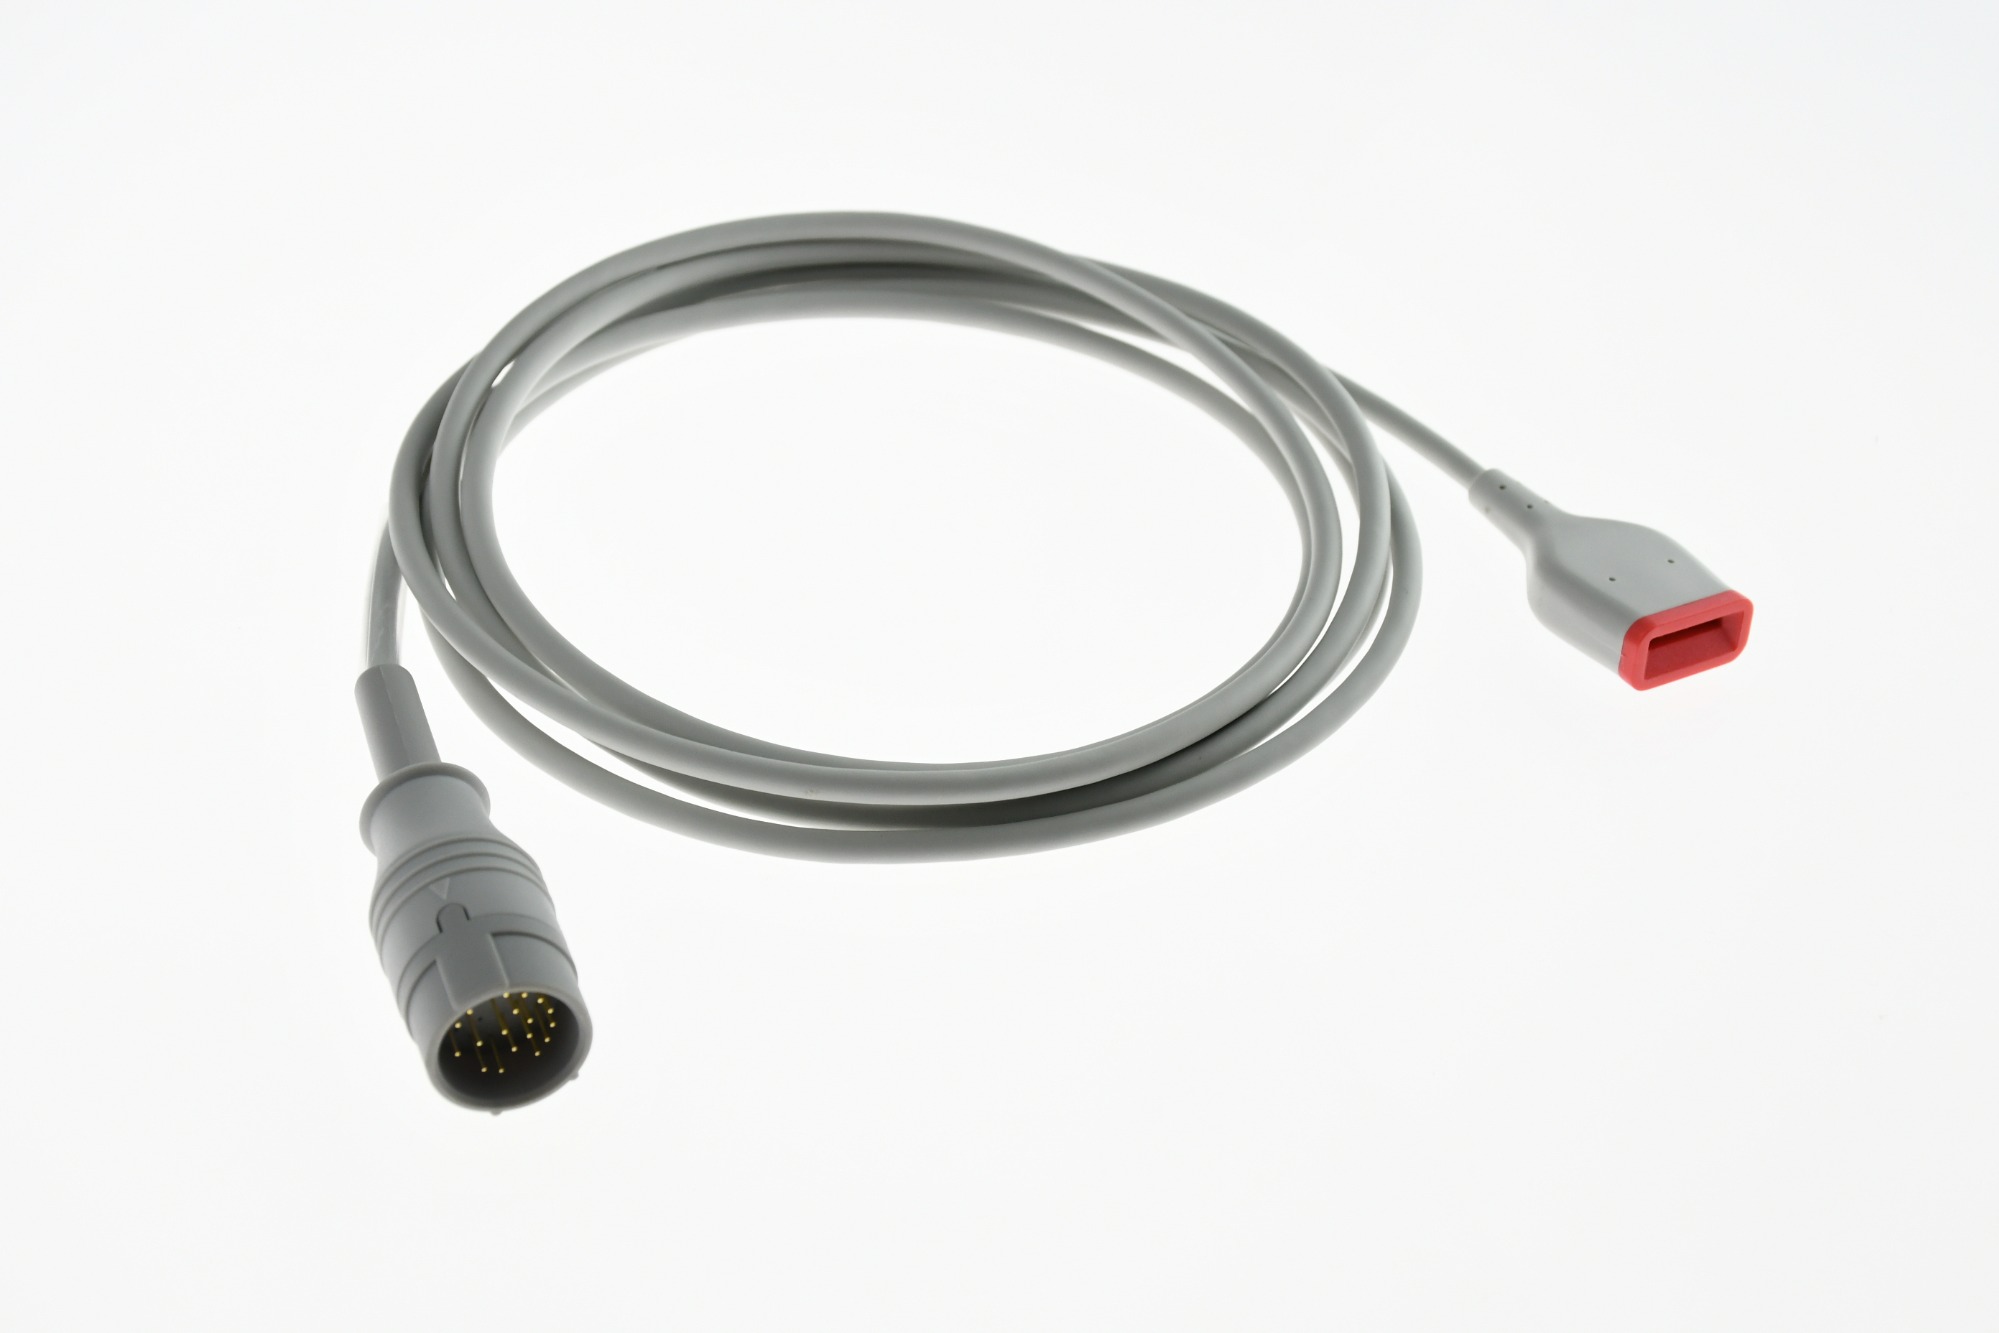 Masimo New Type RD Set Medical SpO2 Extension Cable Adapter Cable For Patient Spo2 Sensor Cable for Oxygen Saustaion Sensor